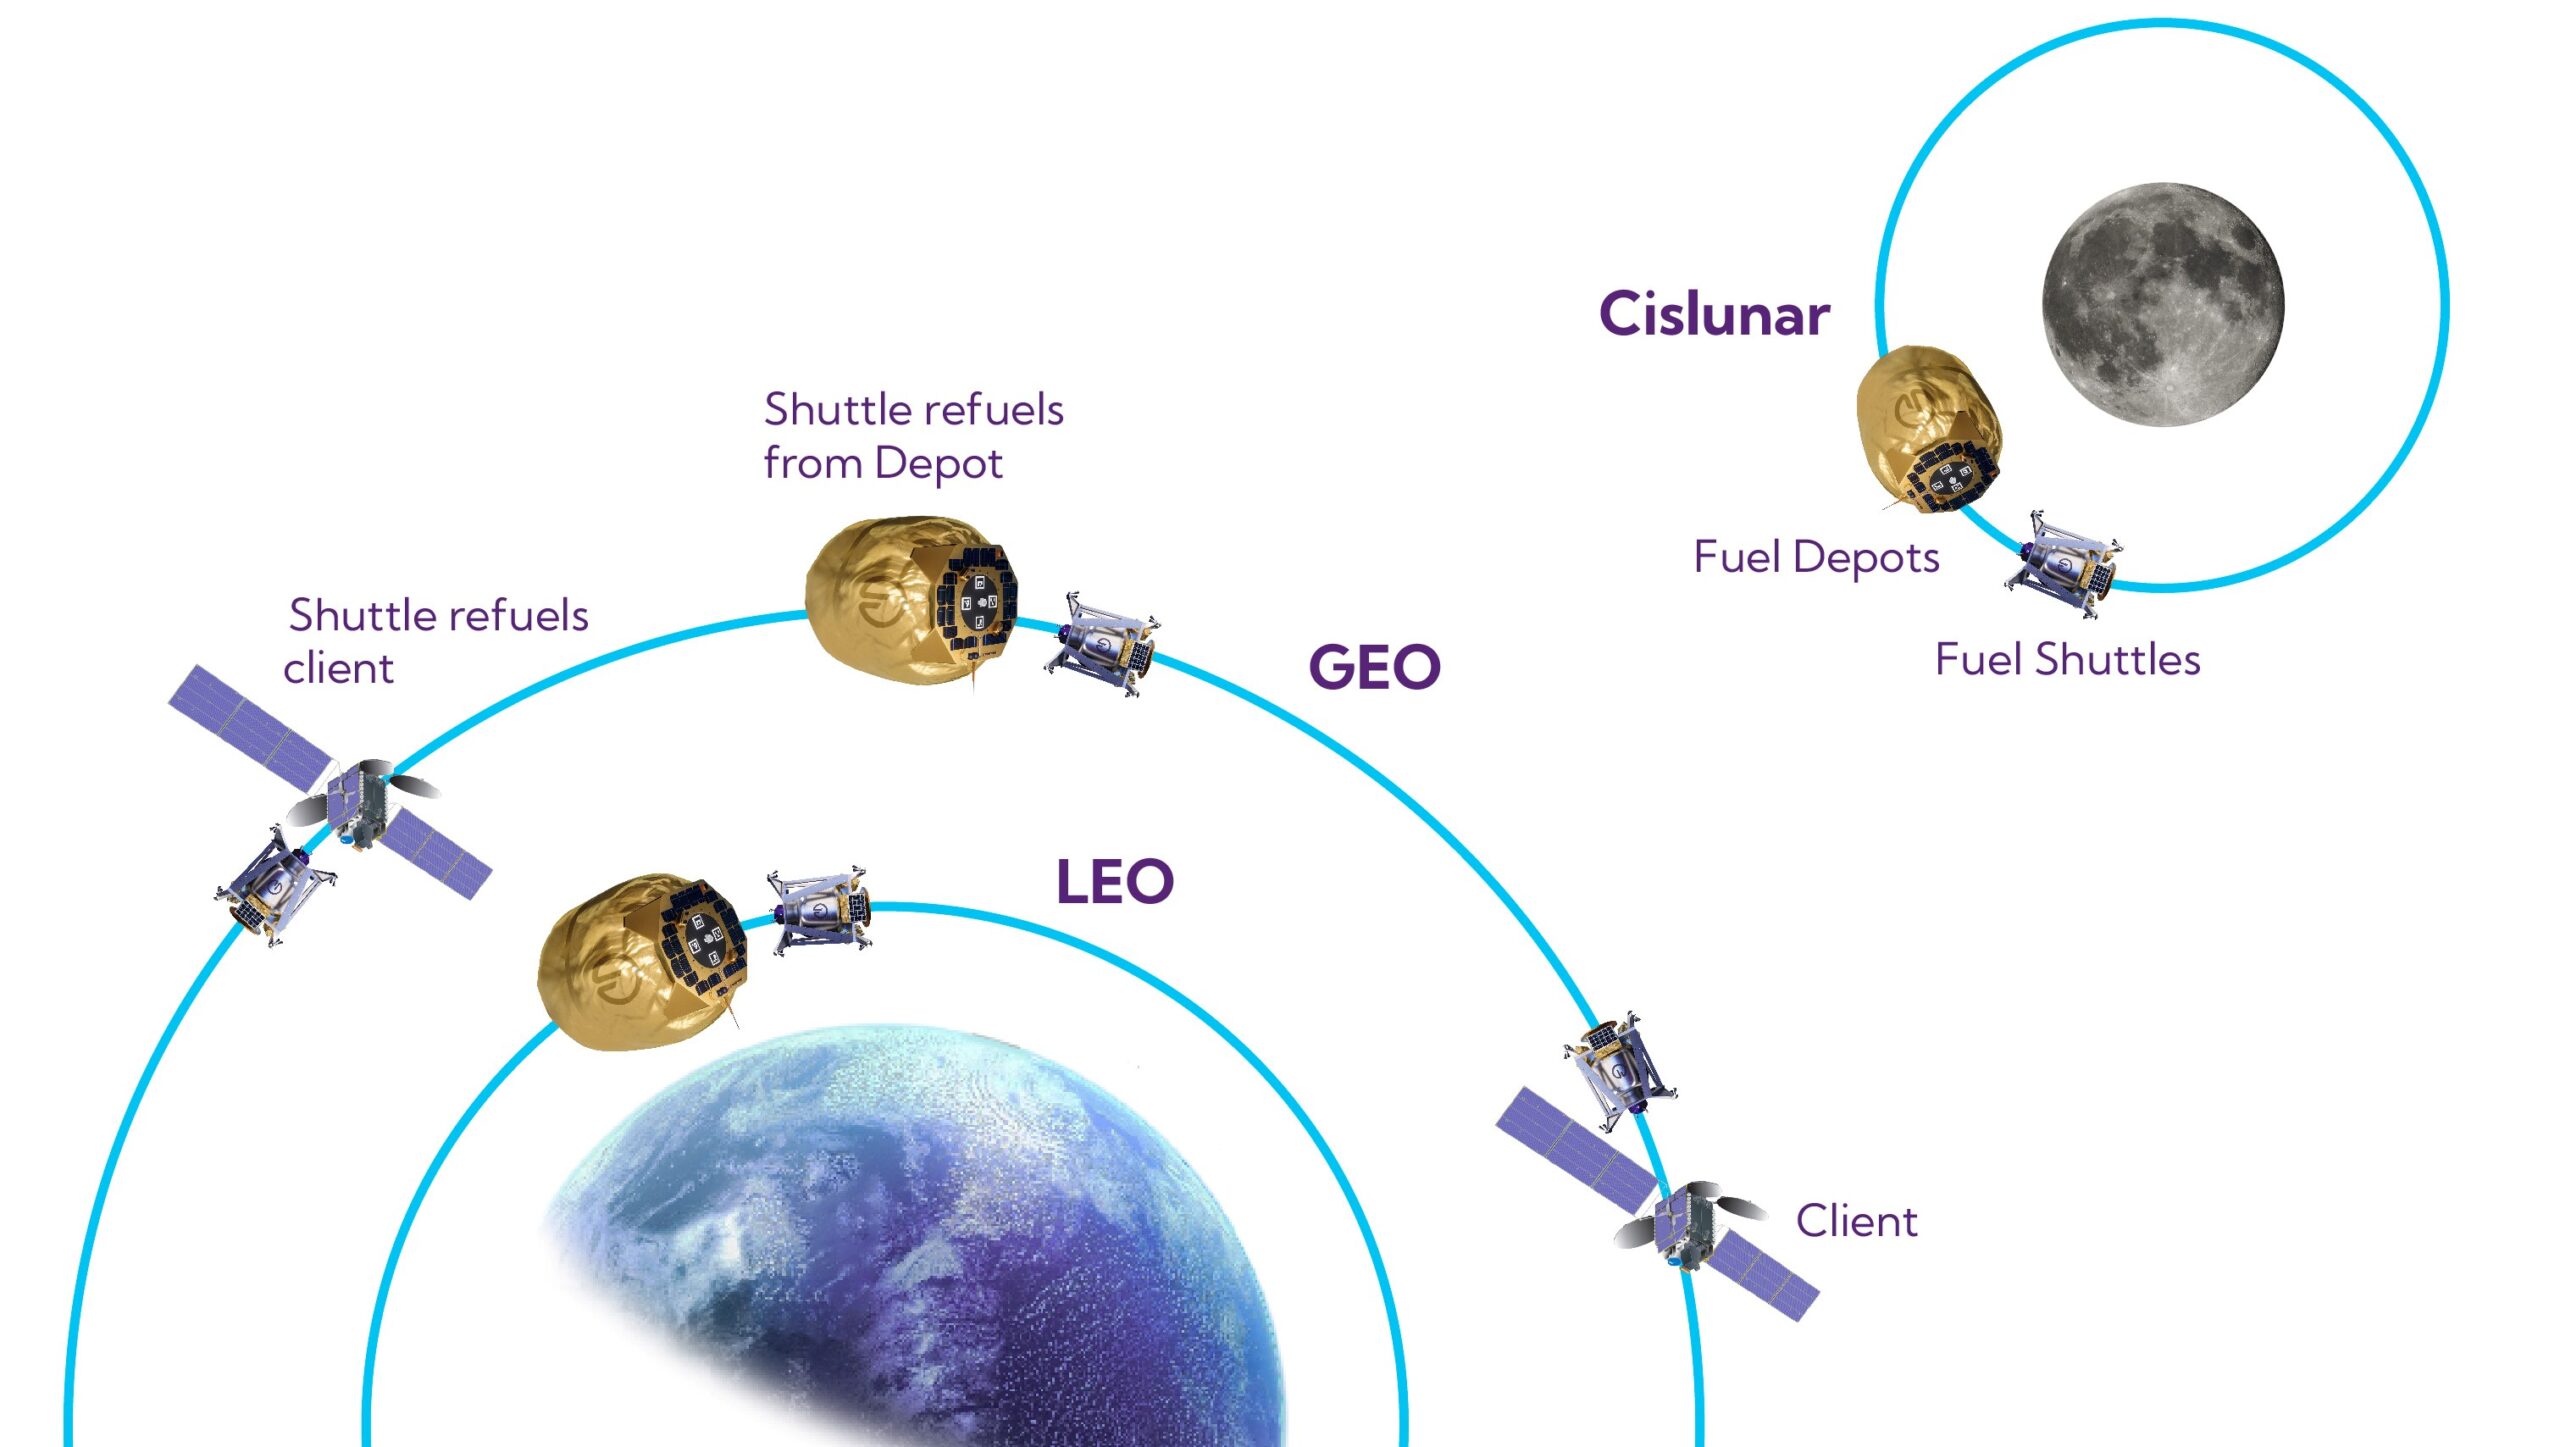 A Shuttle and Depot Architecture for Reliable and Cost-Effective Refueling Operations in All Orbits